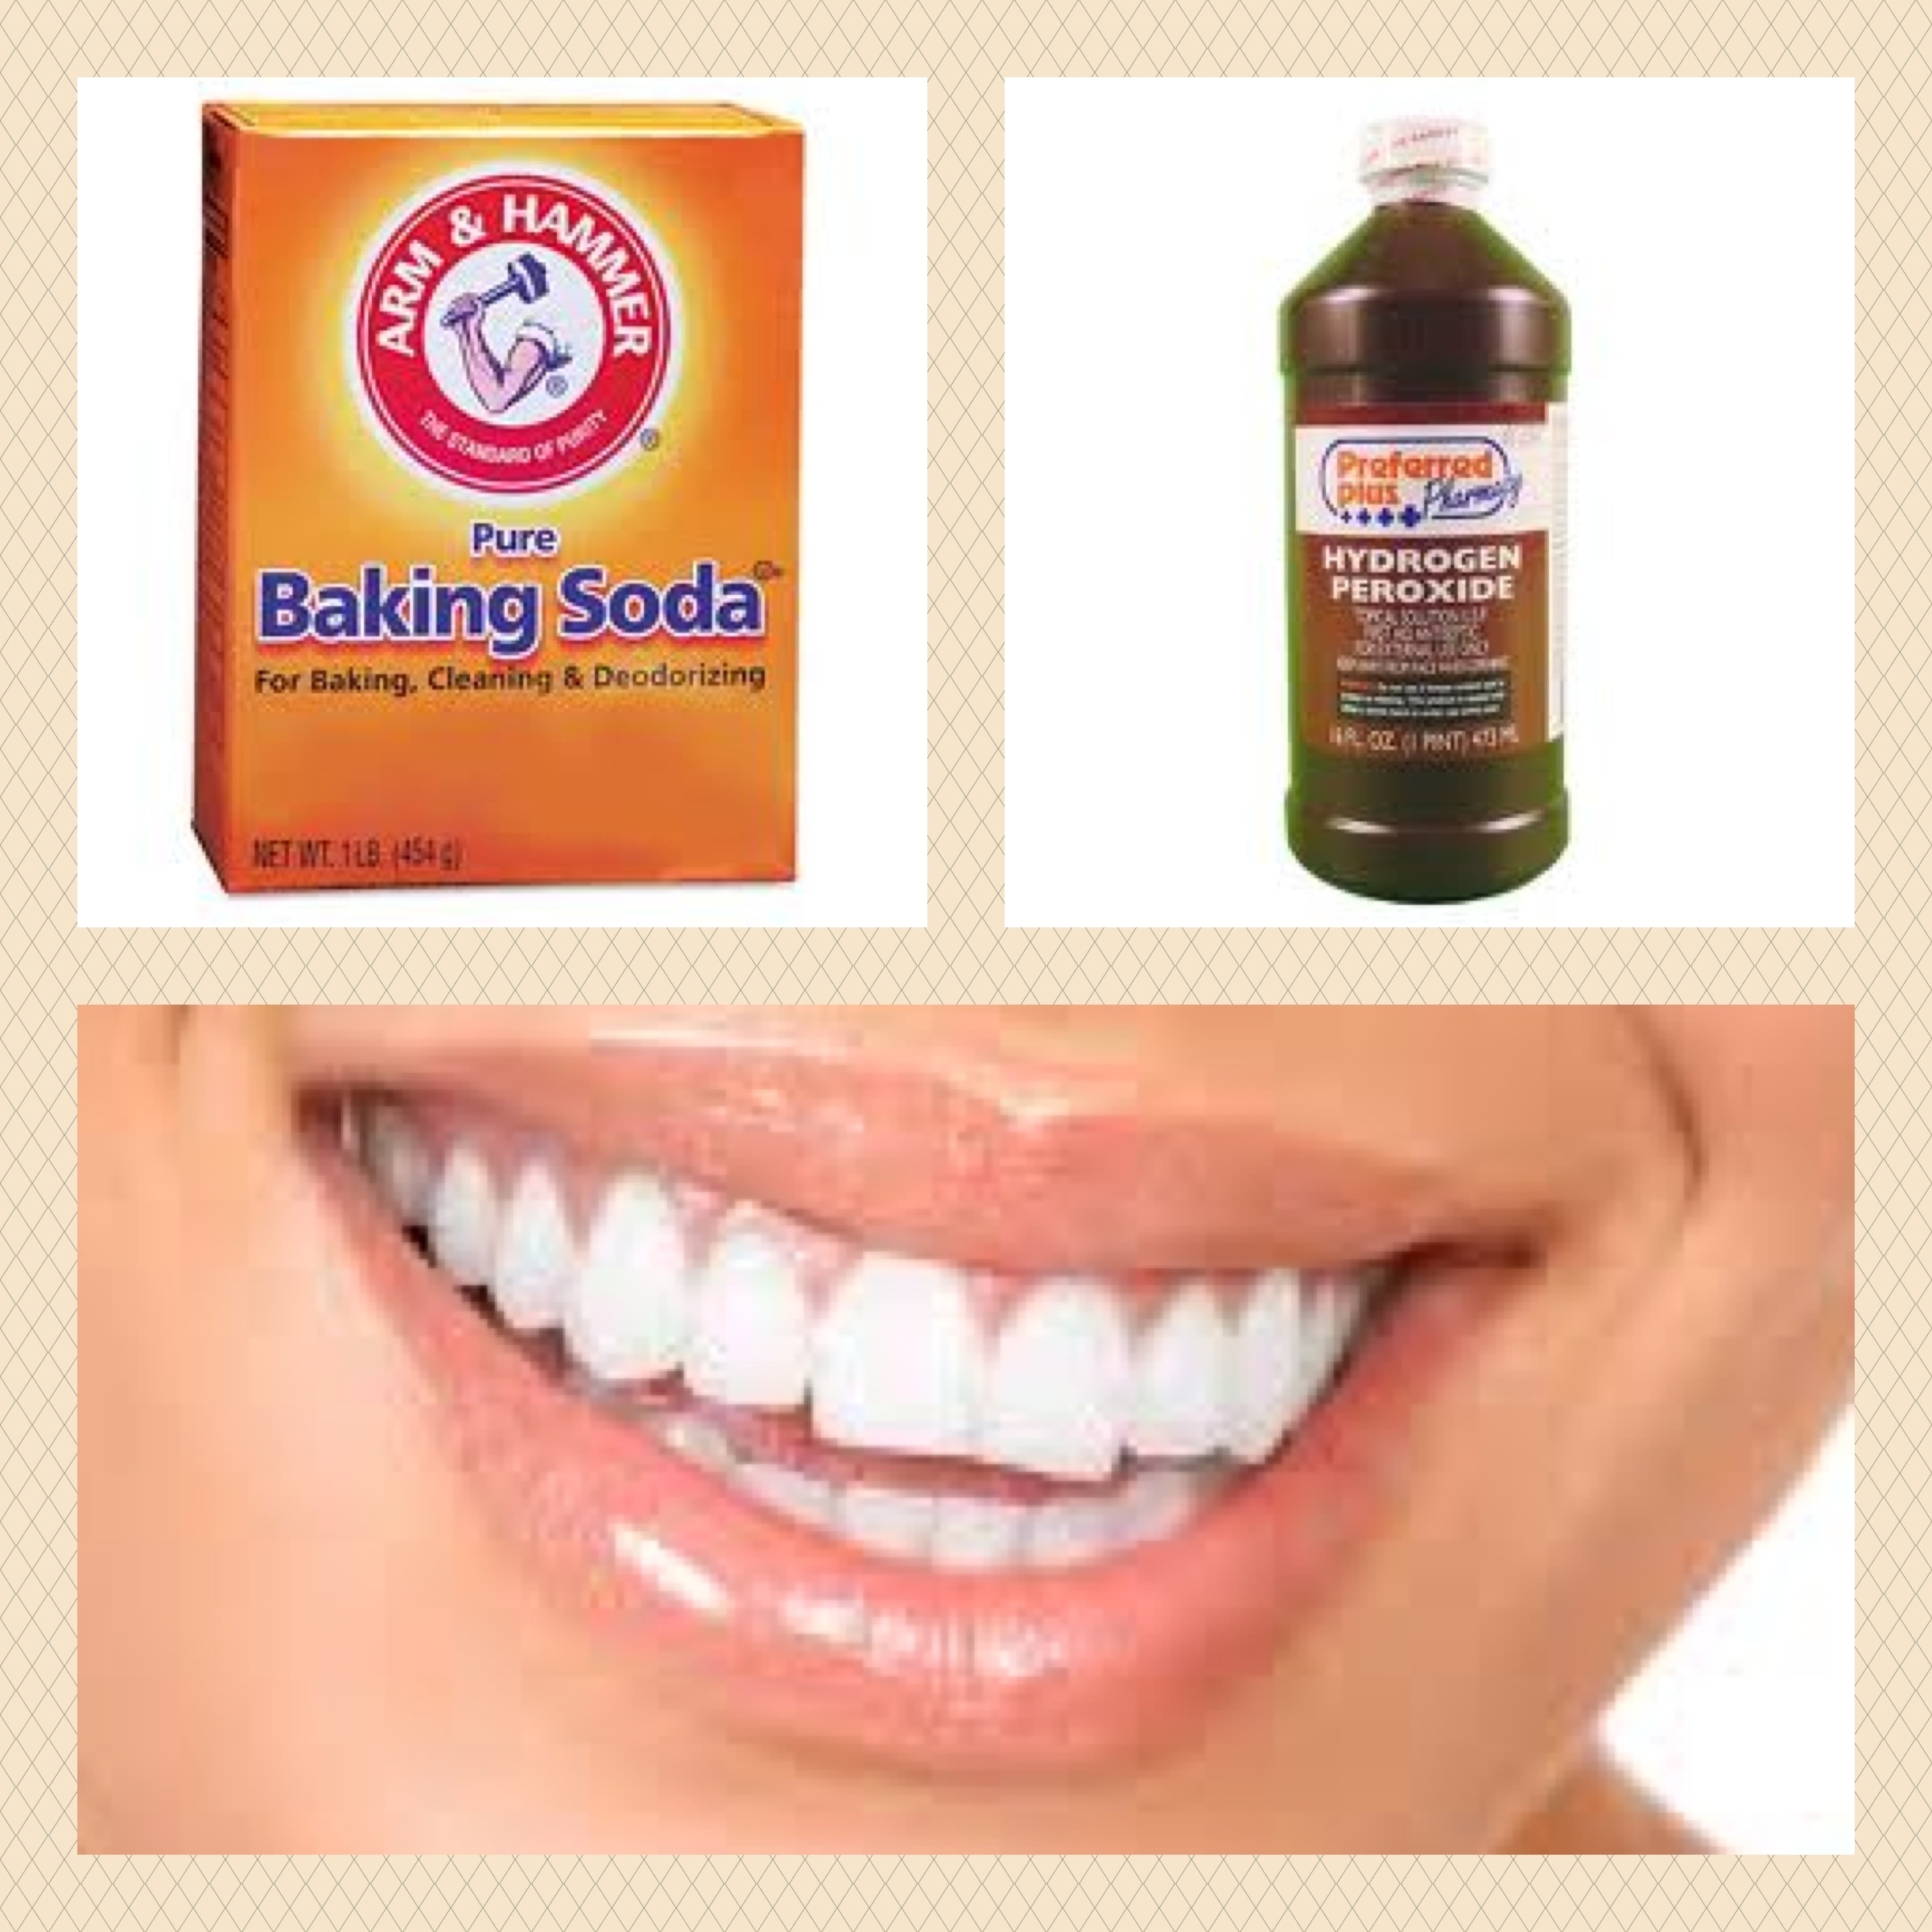 Teeth Whitening Trays Coupon Codes Best Reviews Teeth Whitening 